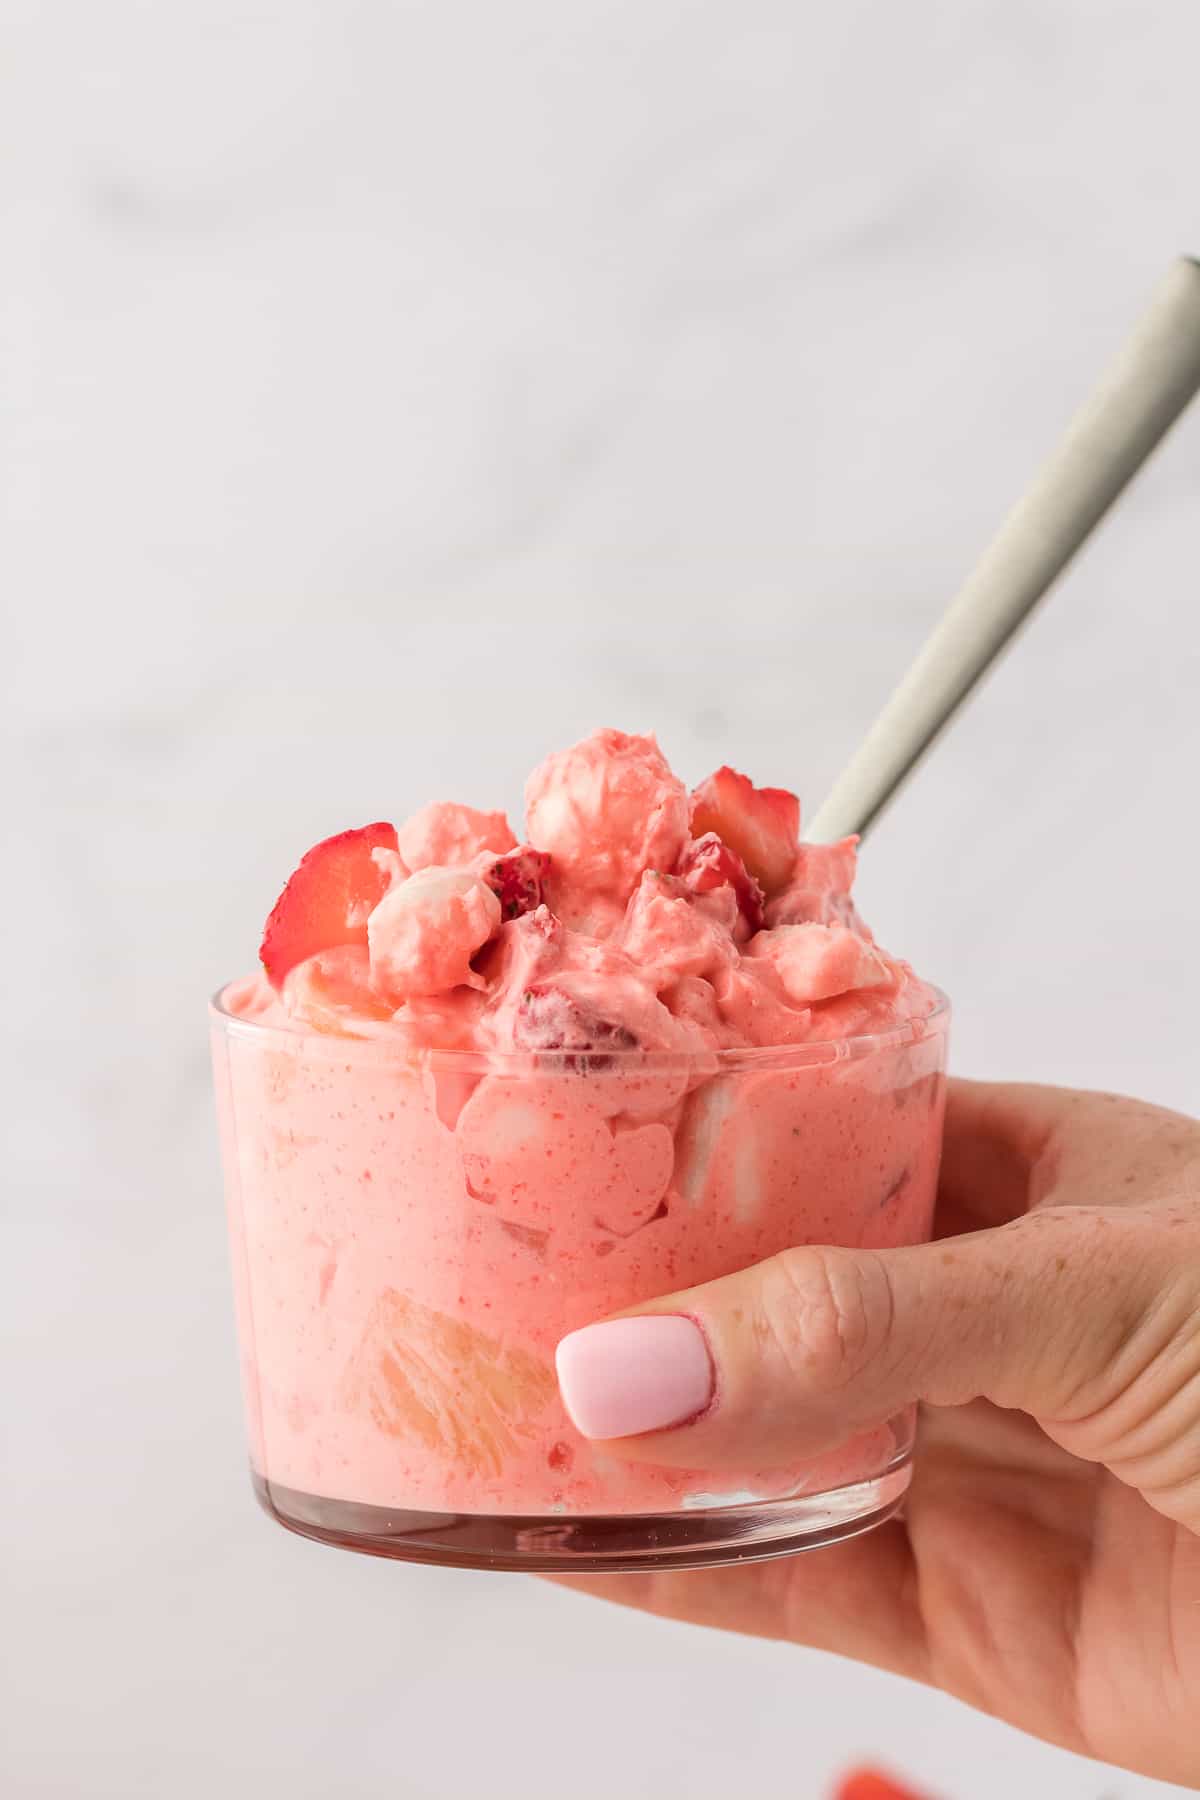 a hand holding a small glass bowl of strawberry fluff with a spoon stuck in it